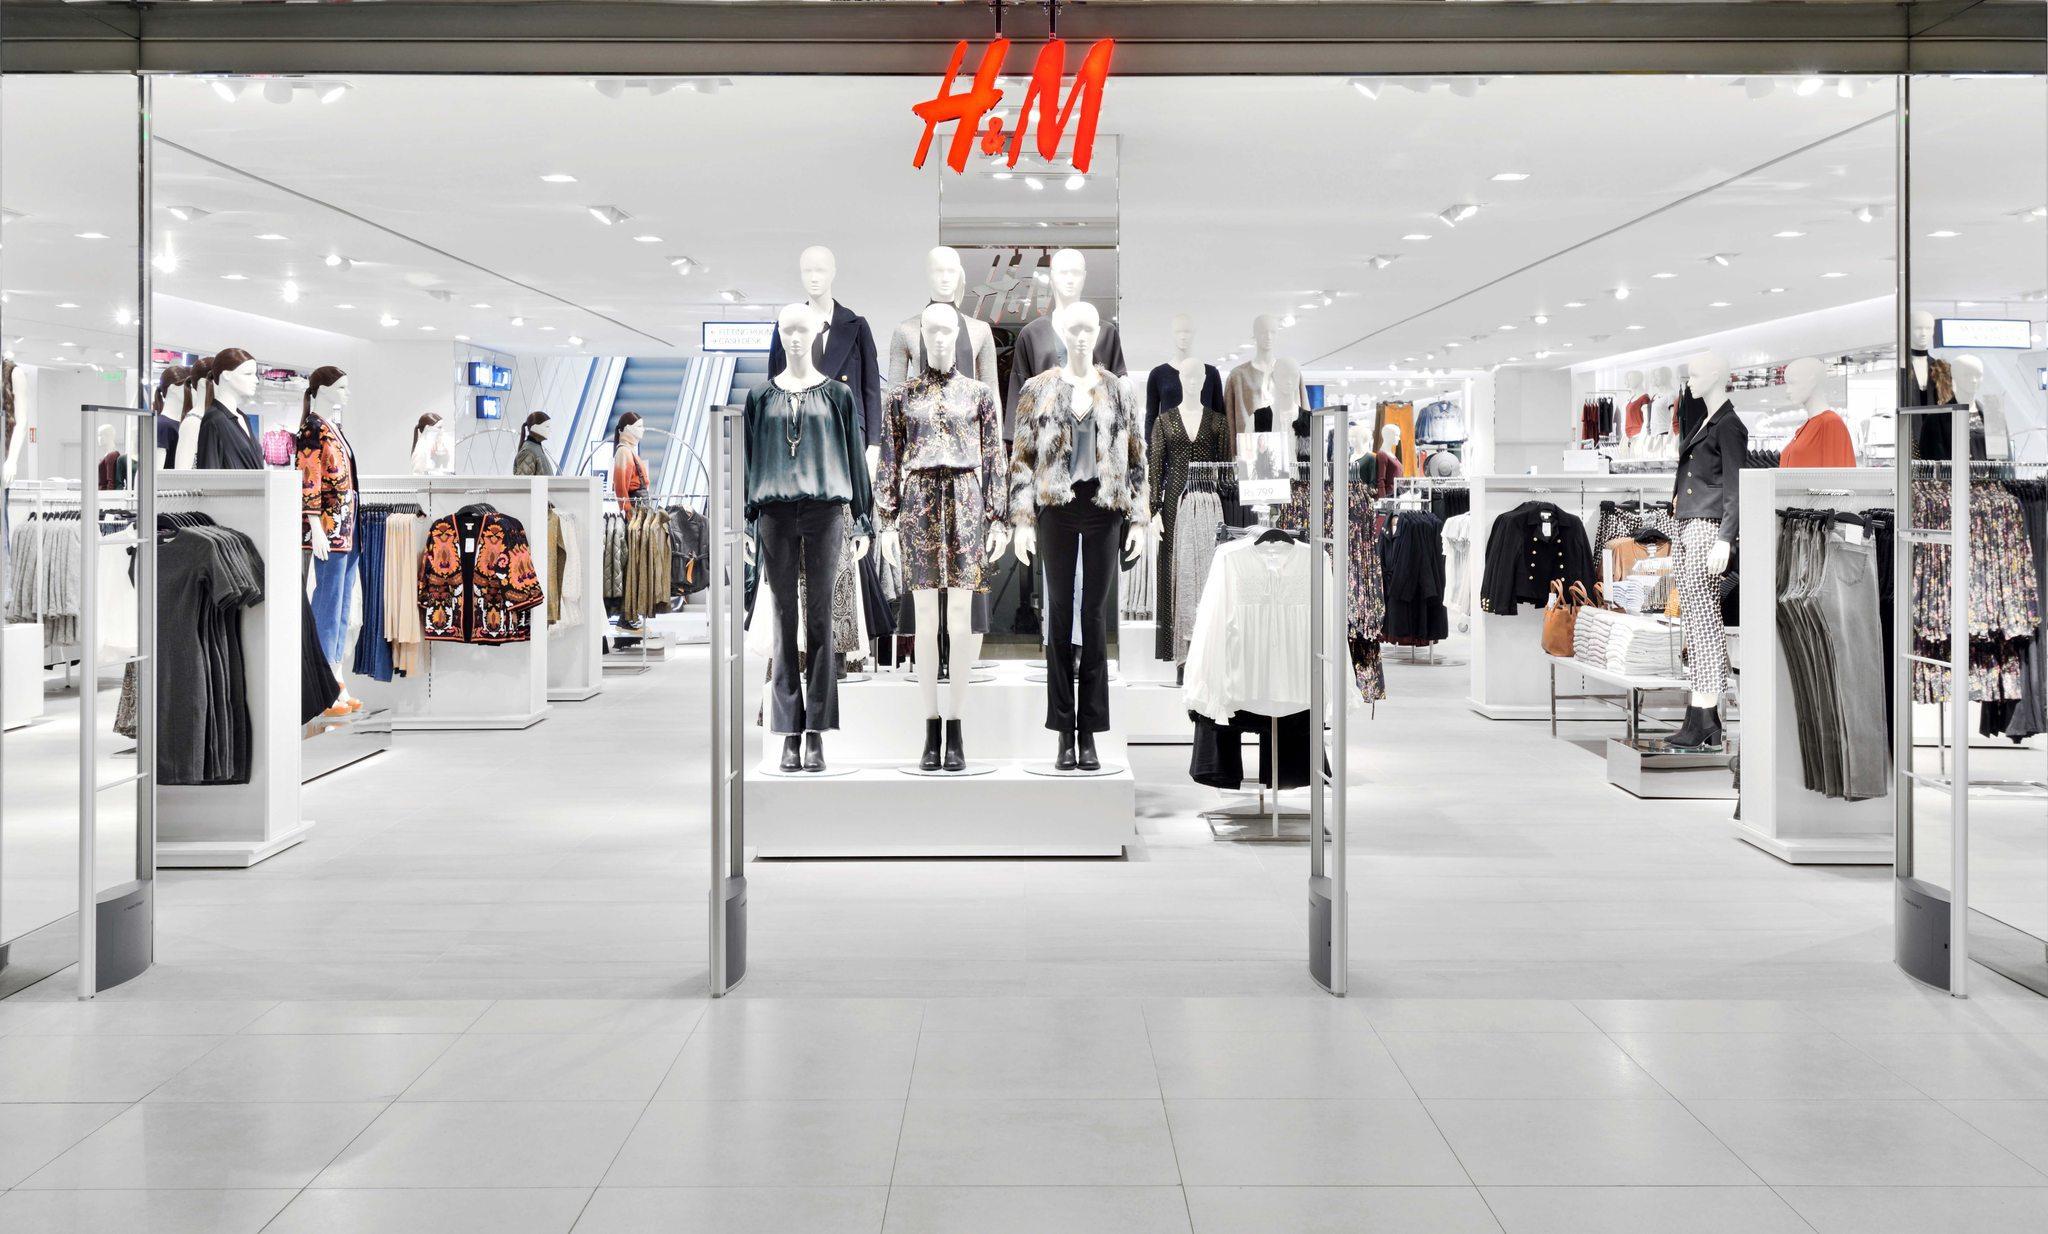 H&M Wallpaper Image Photo Picture Background